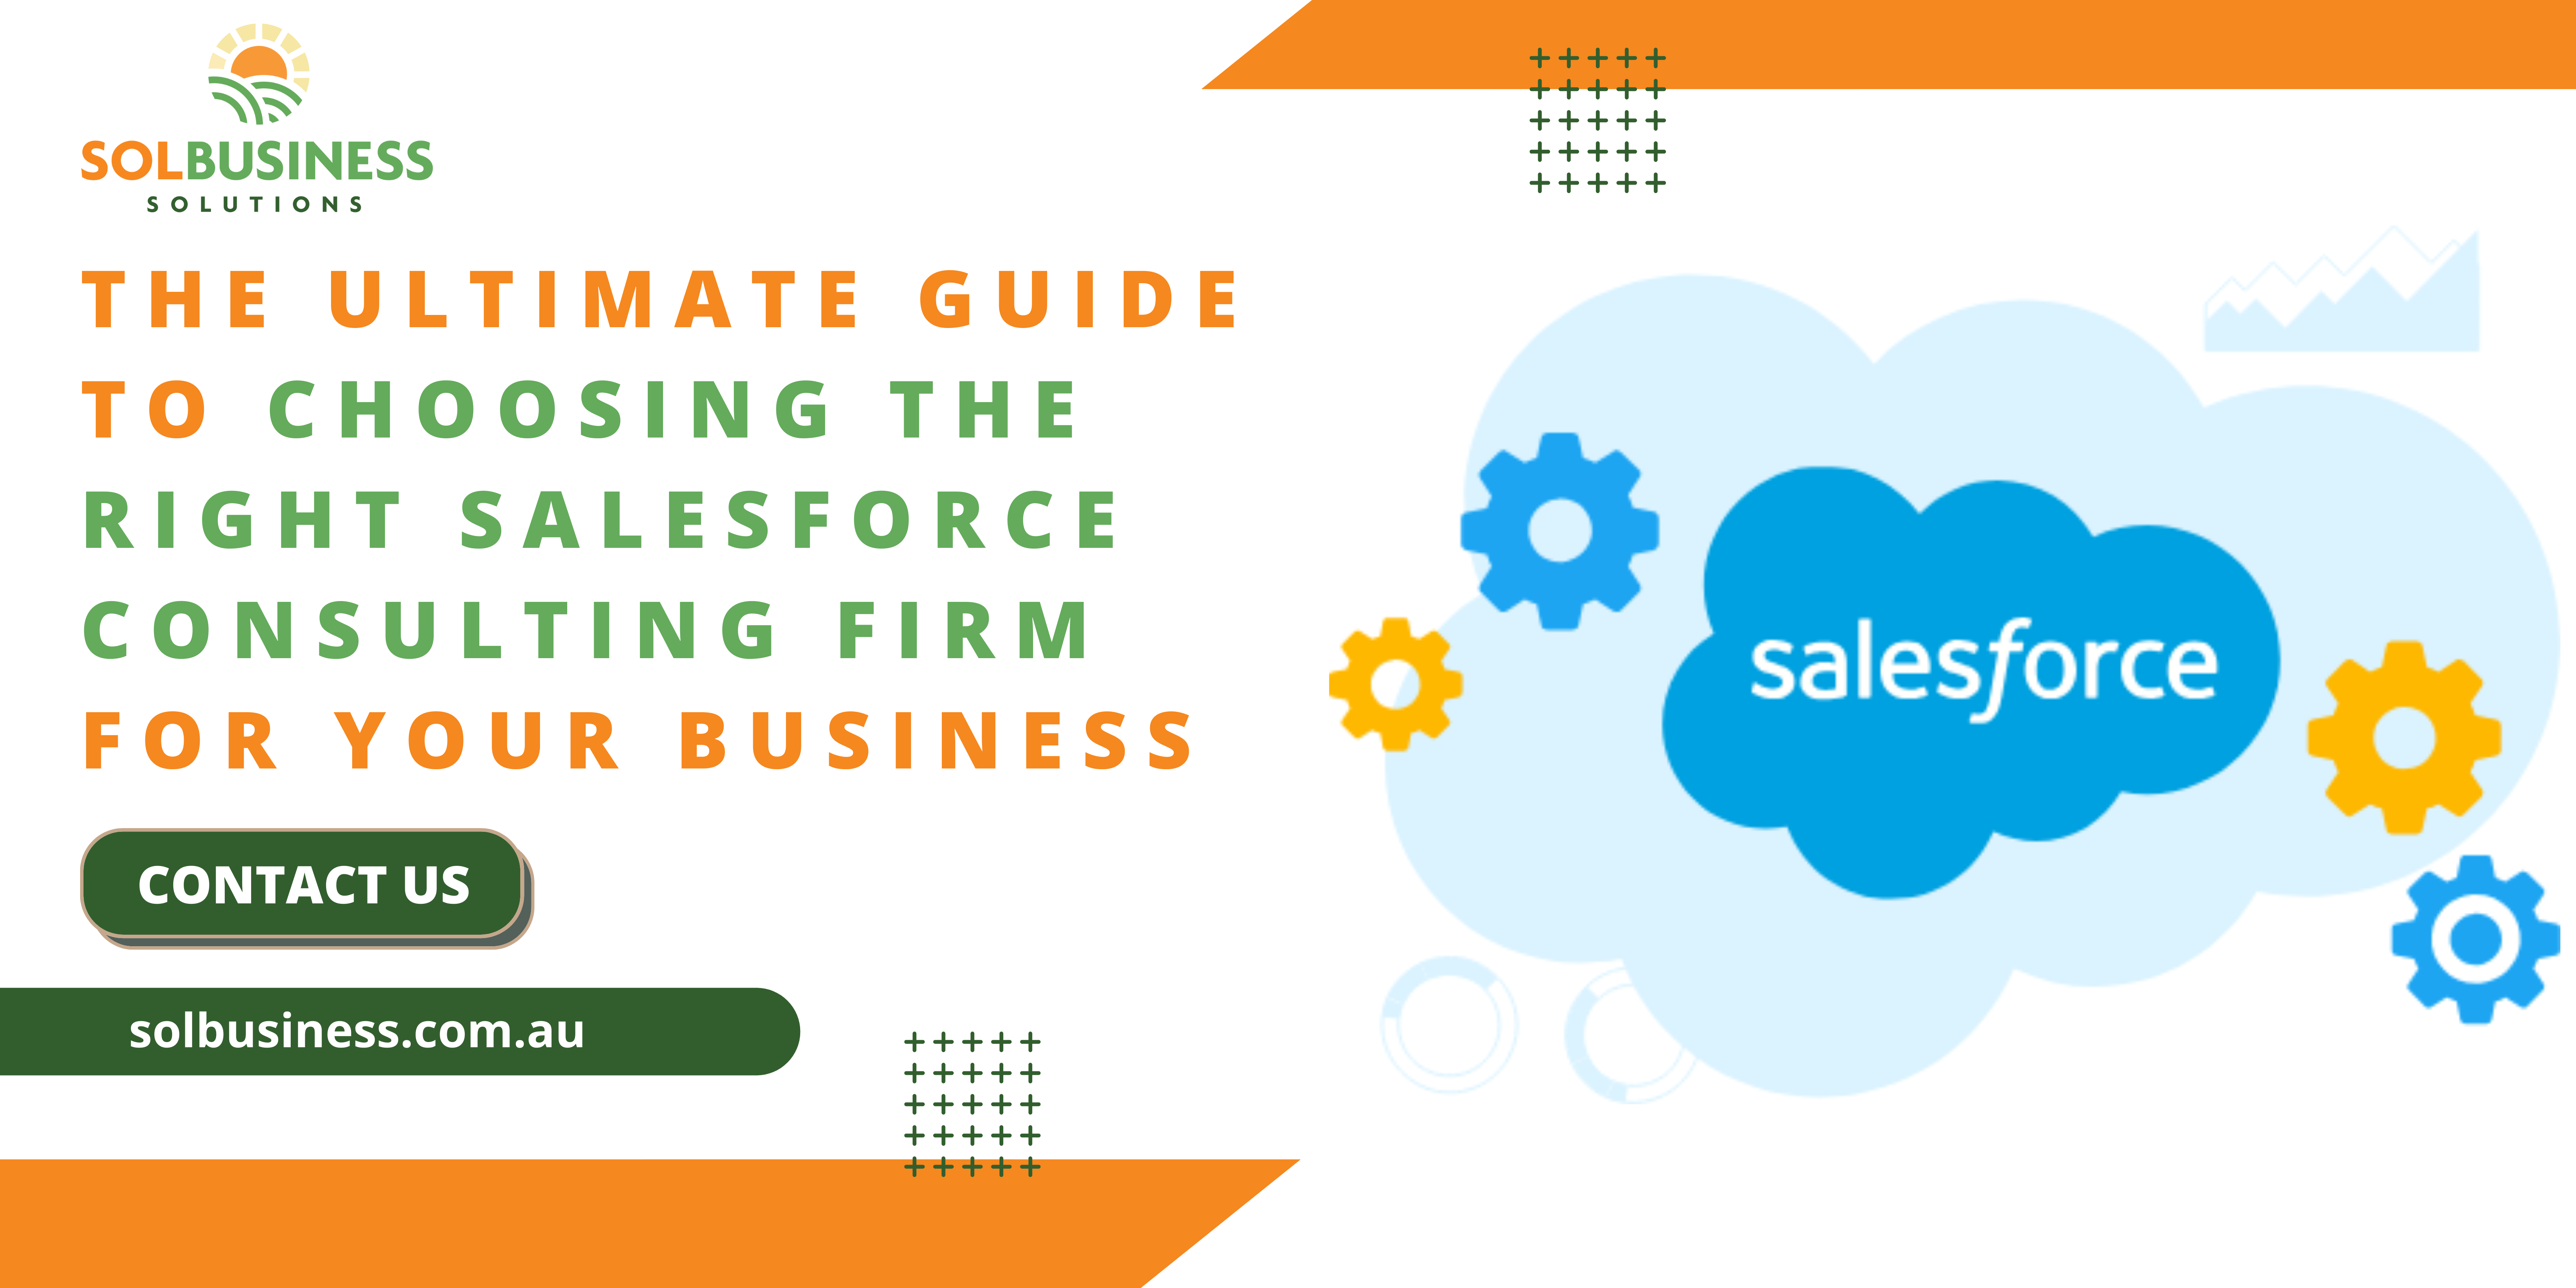 The Ultimate Guide to Choosing the Right Salesforce Consulting Firm for Your Business